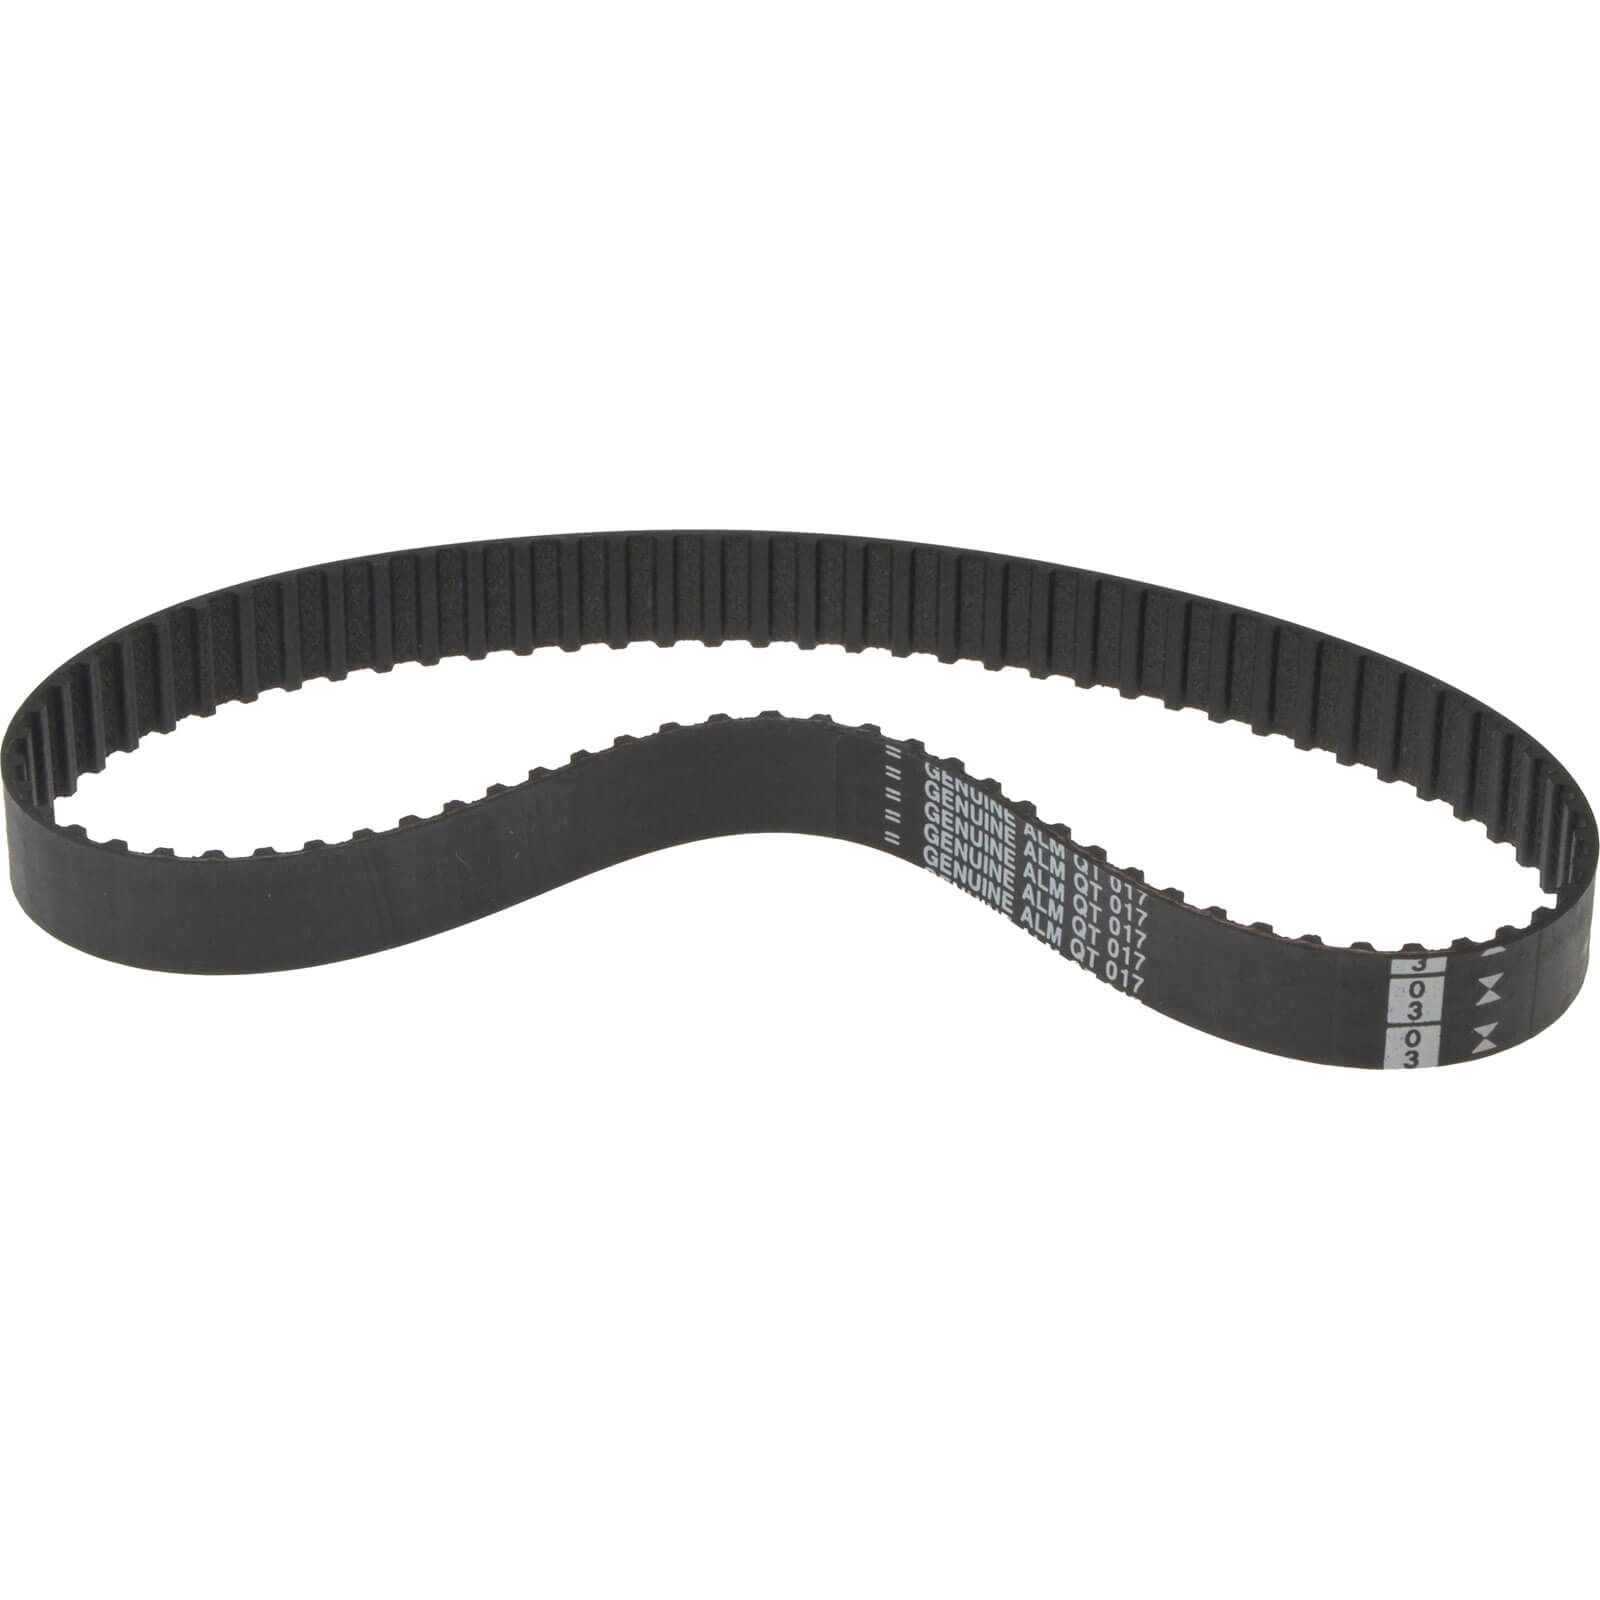 ALM Manufacturing QT017 Drive Belt to Fit Qualcast Rear Grass Boxed Lawnmowers